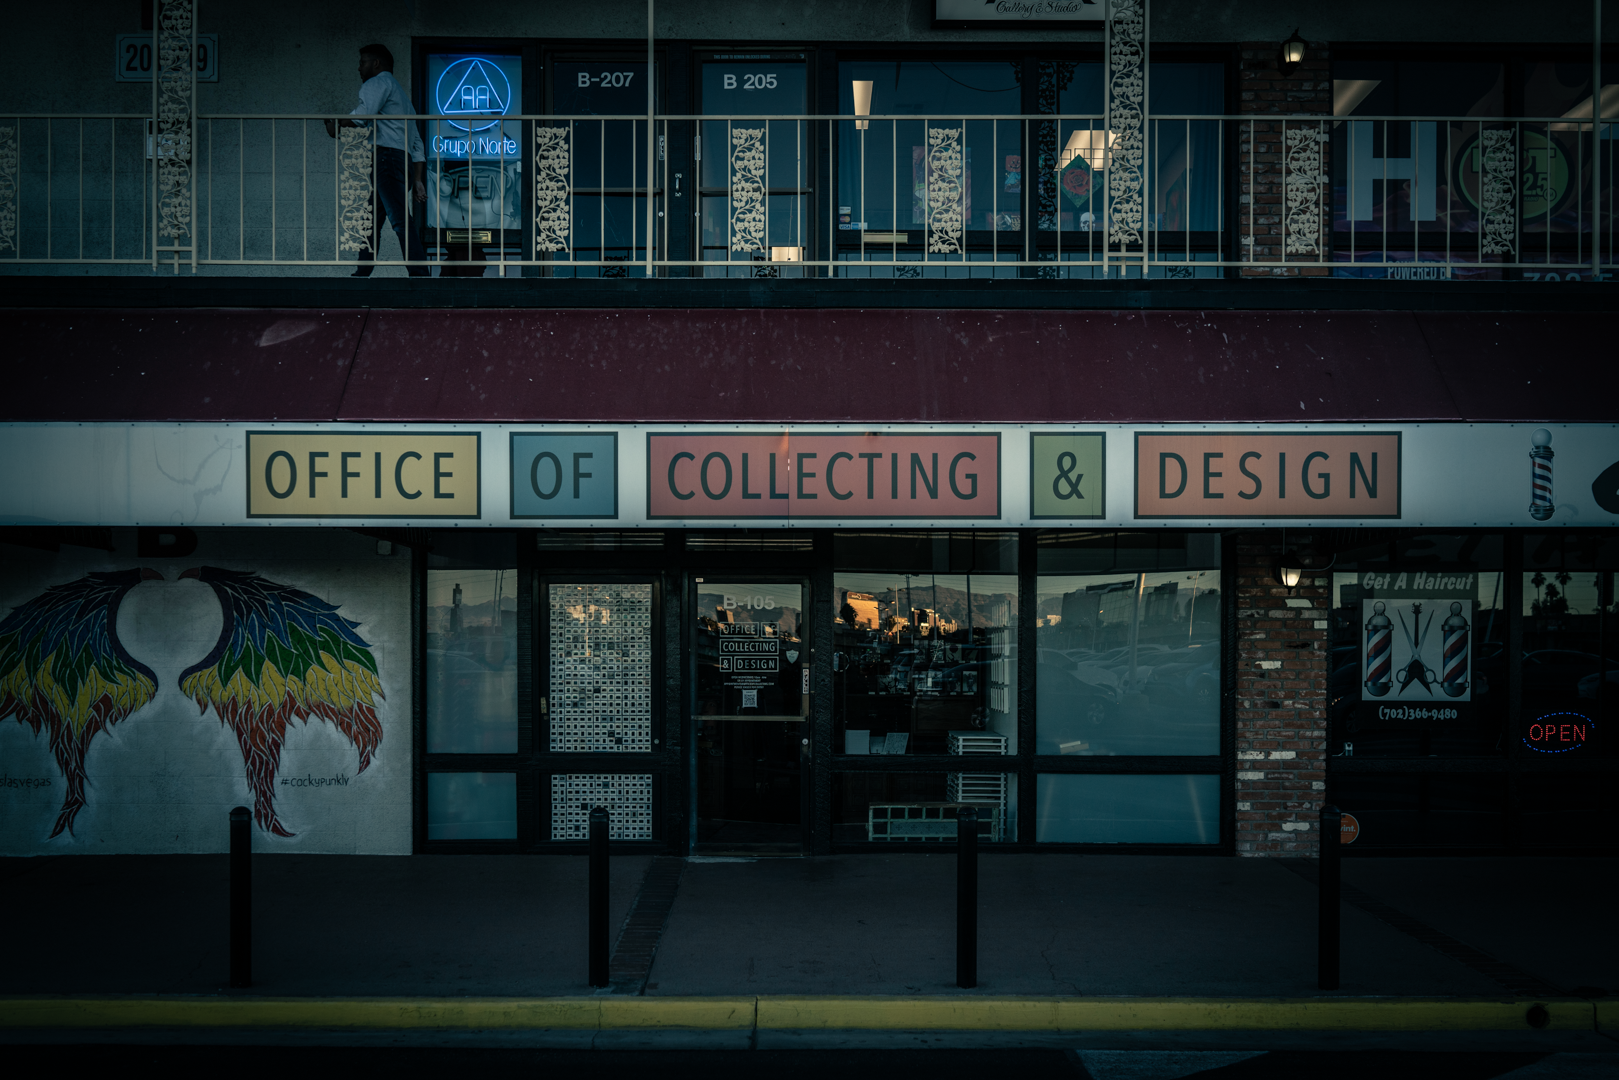 Office of Collecting and Design